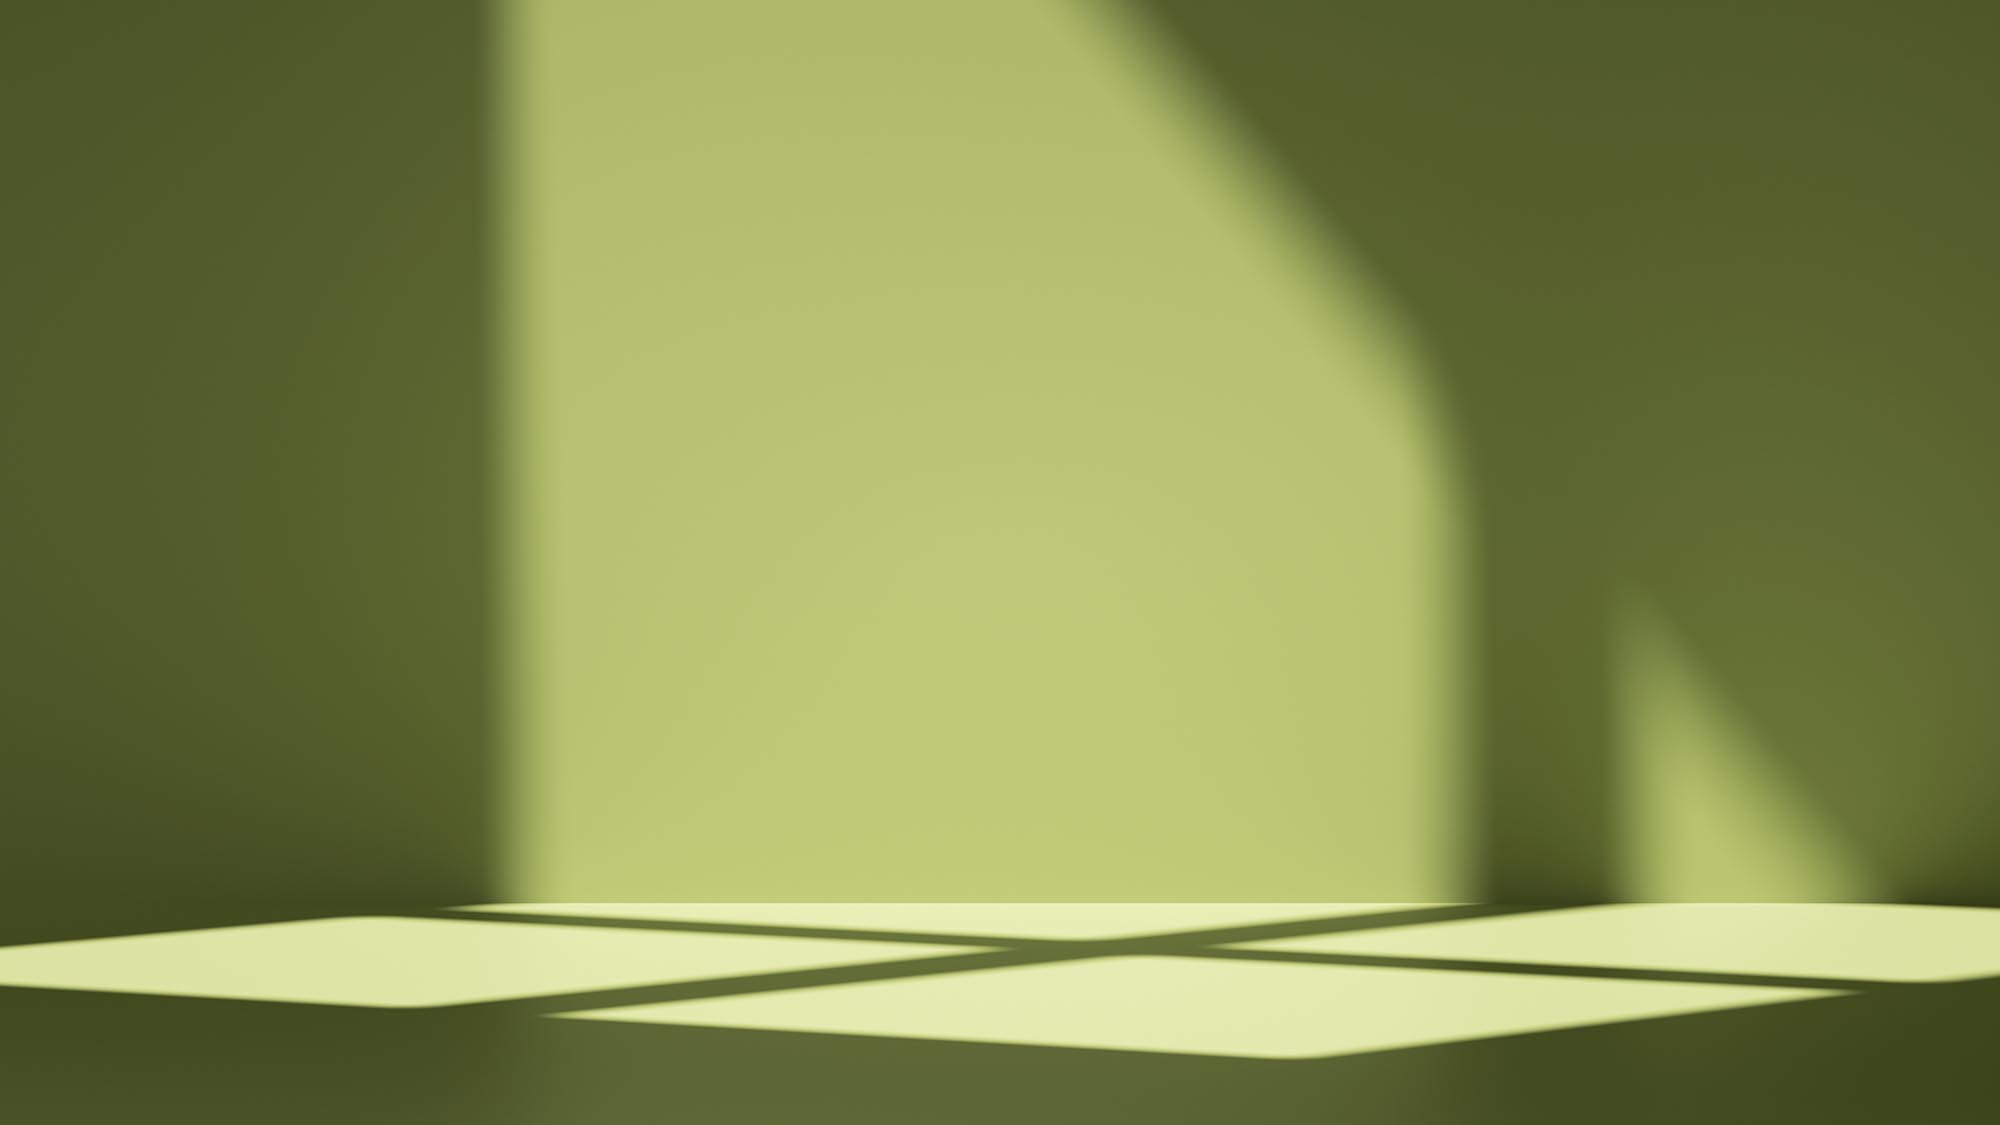 simple abstract green background with shadows and illuminated with bright sunlight going through the window